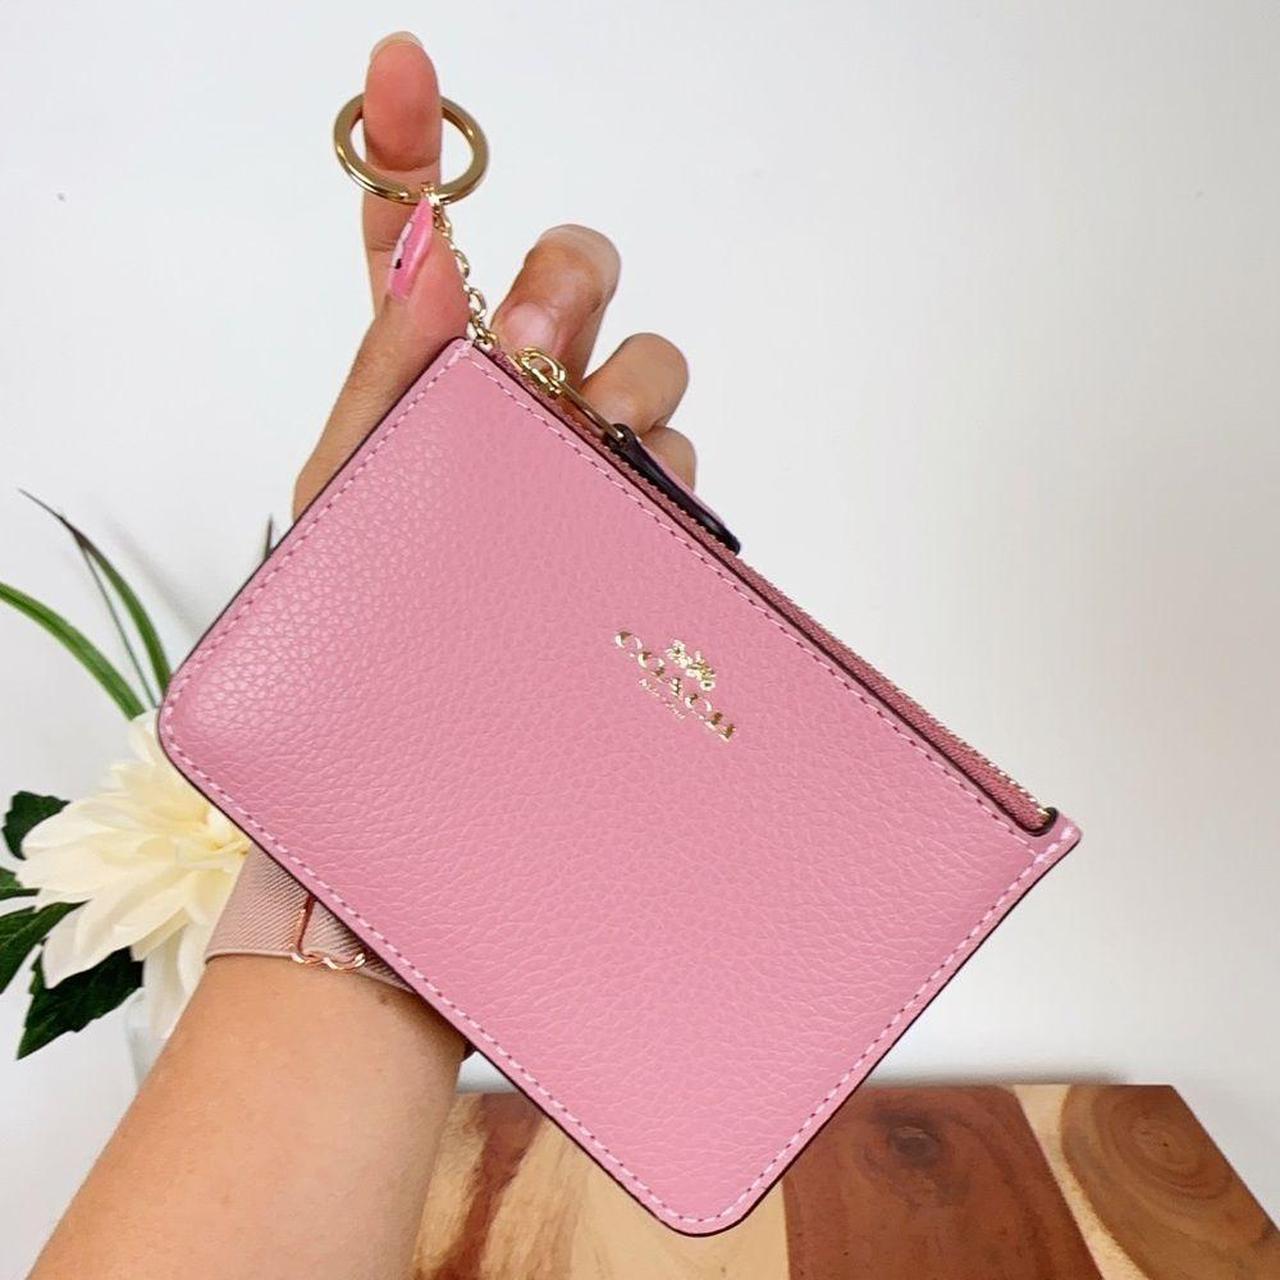 New Coach Authentic Pink Flowers Wallet